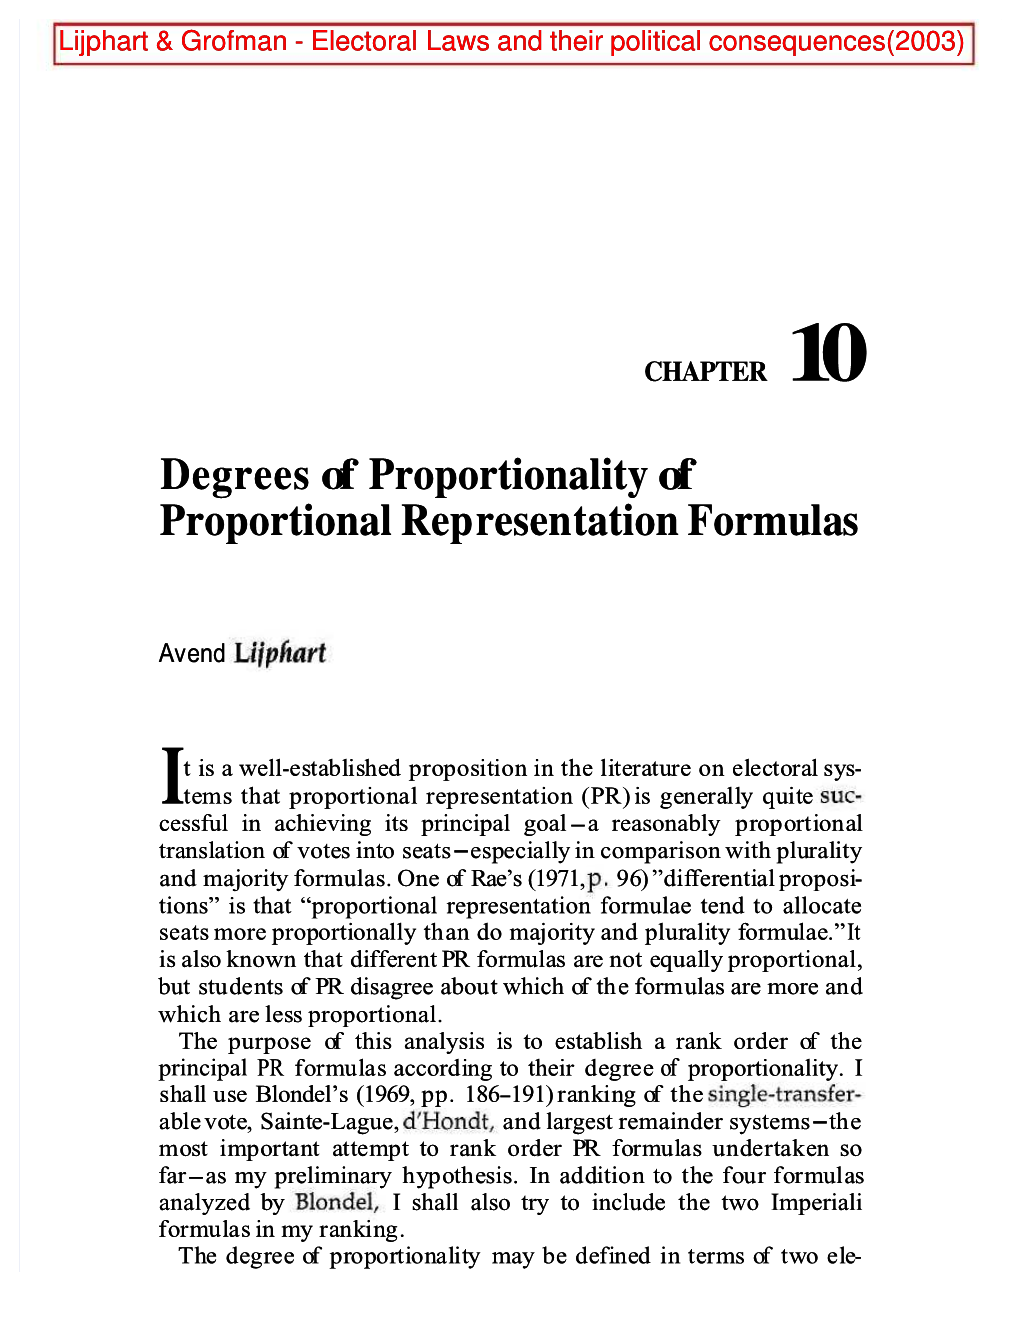 Degrees of Proportionality Proportionality of Proportional Rep